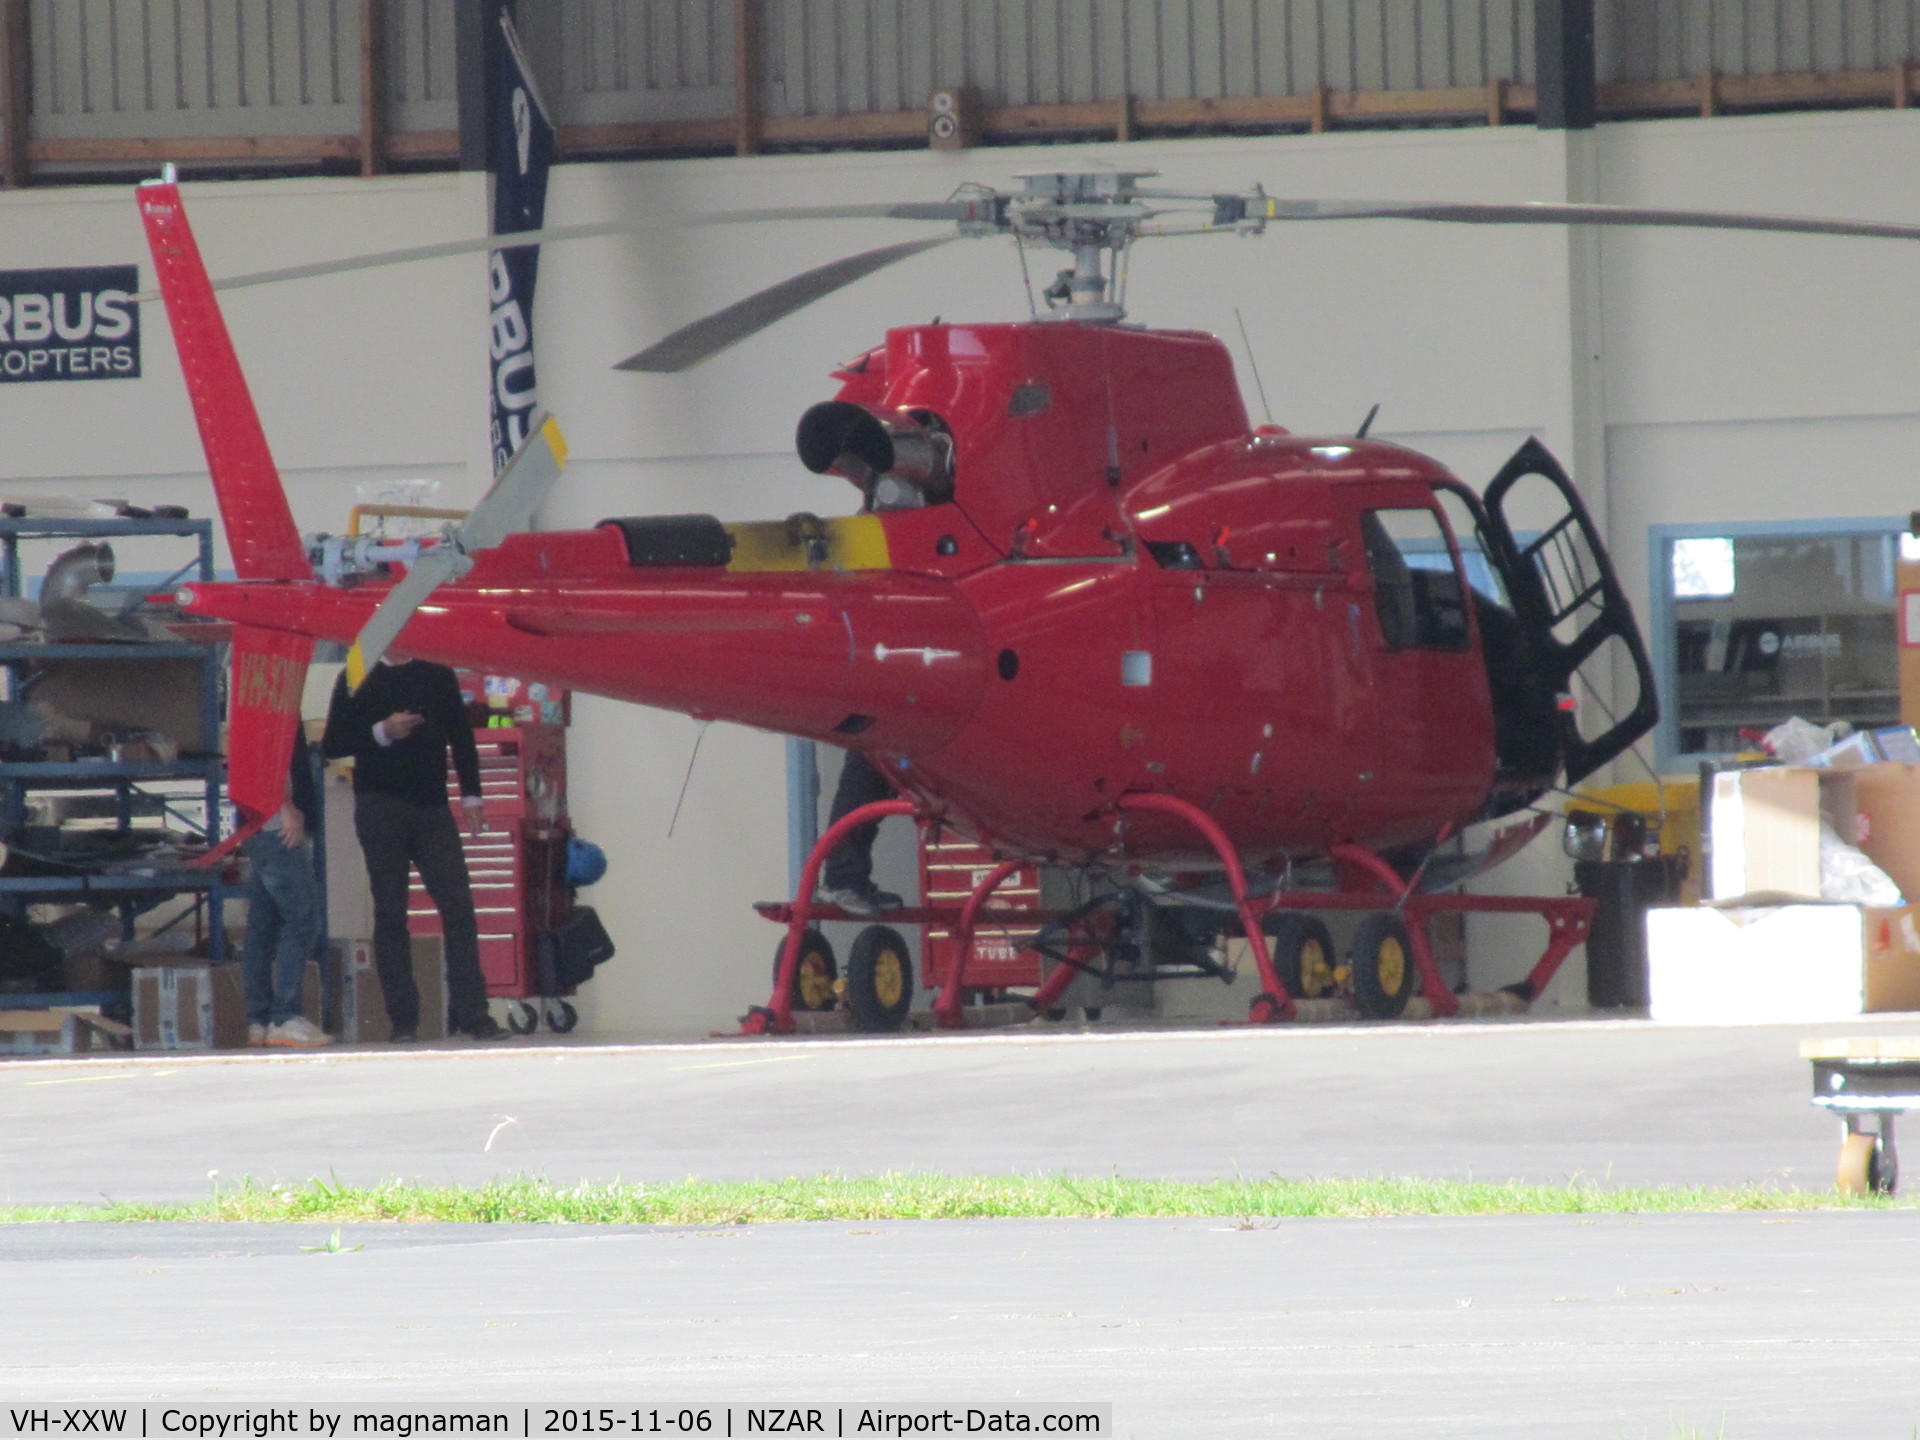 VH-XXW, 2015 Airbus Helicopters AS-350B-3 Ecureuil C/N 8099, in airbus hangar at ardmore